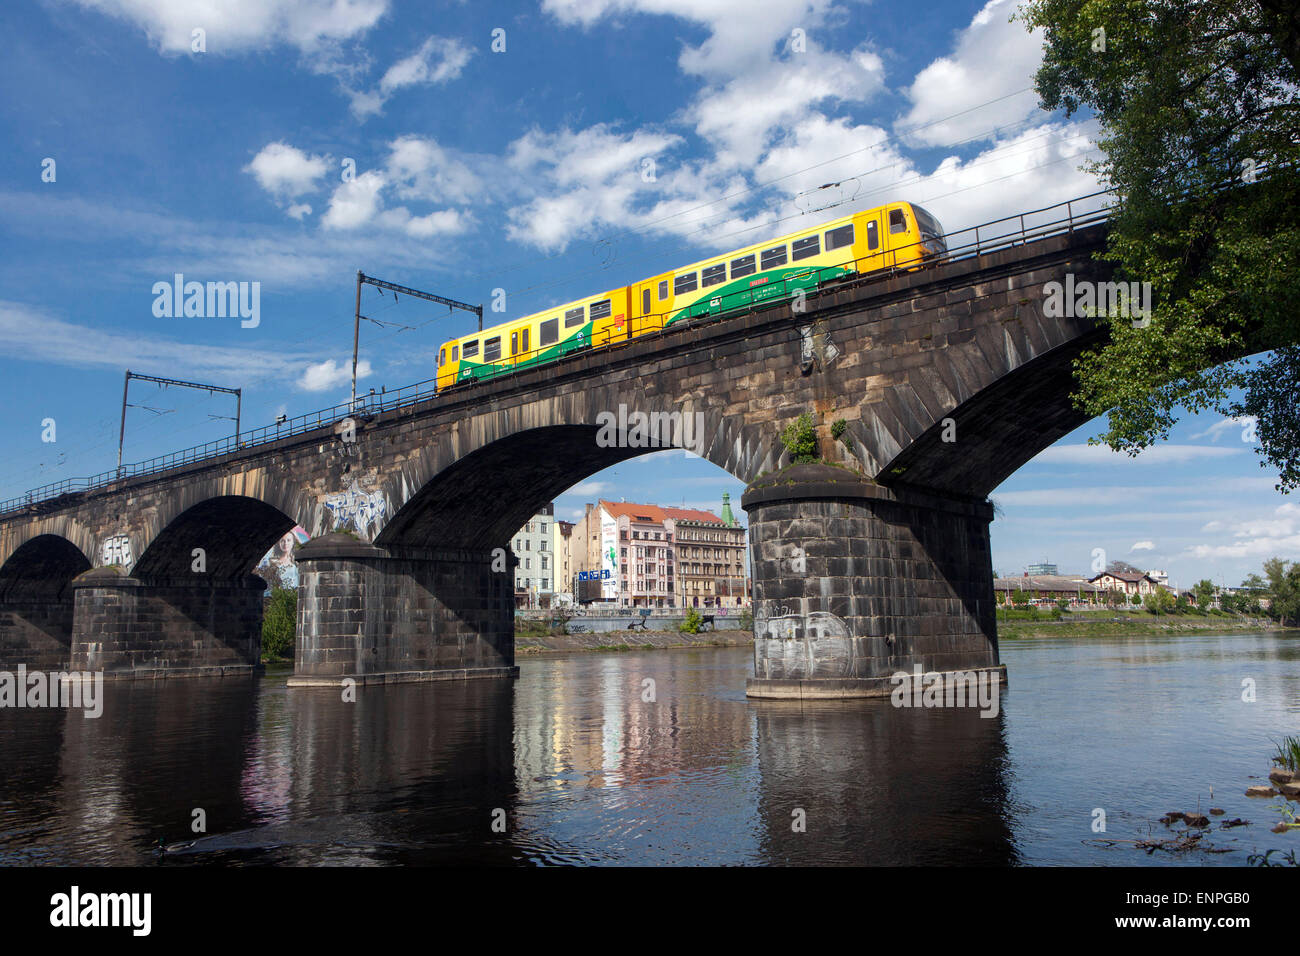 The Negrelli Viaduct is after the Charles Bridge, the second oldest still existing bridge over the Vltava river in Prague. Czech Republic Train Stock Photo